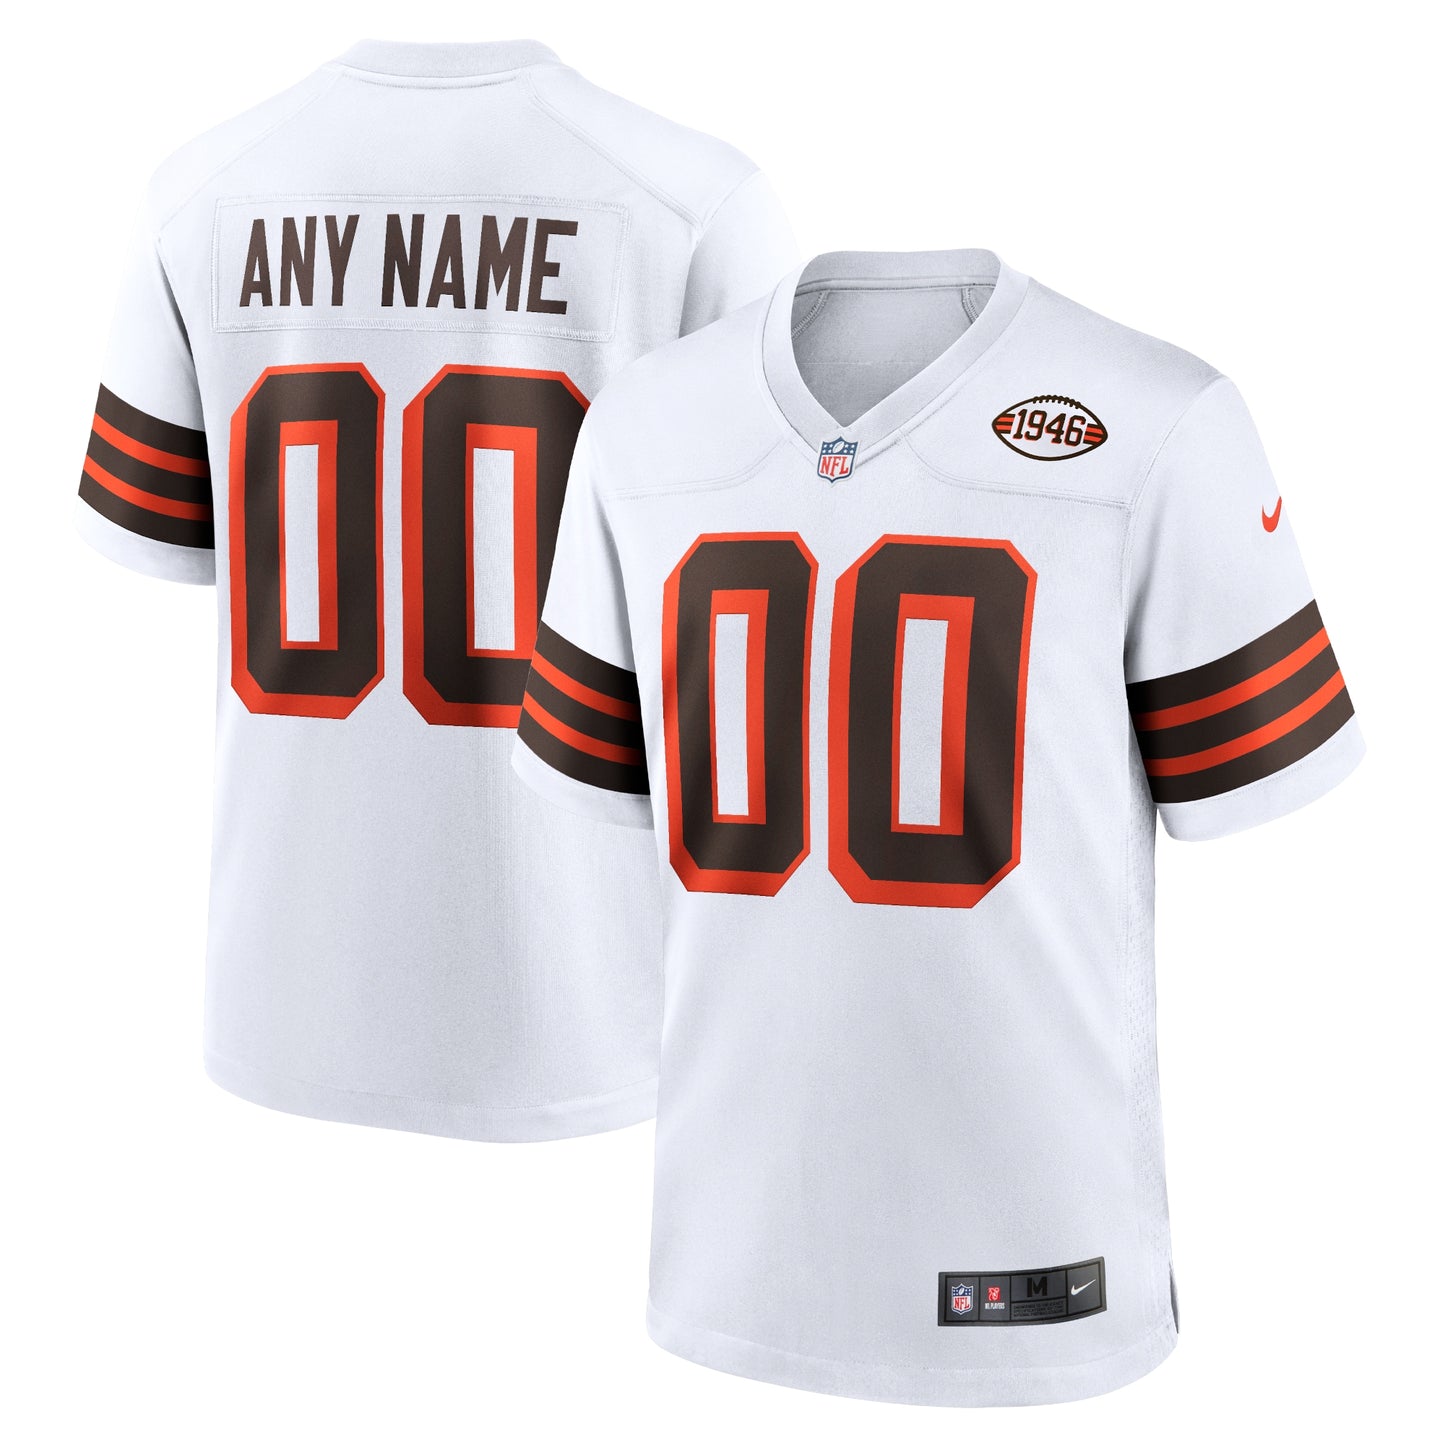 Cleveland Browns Nike 1946 Collection Alternate Custom Jersey - White